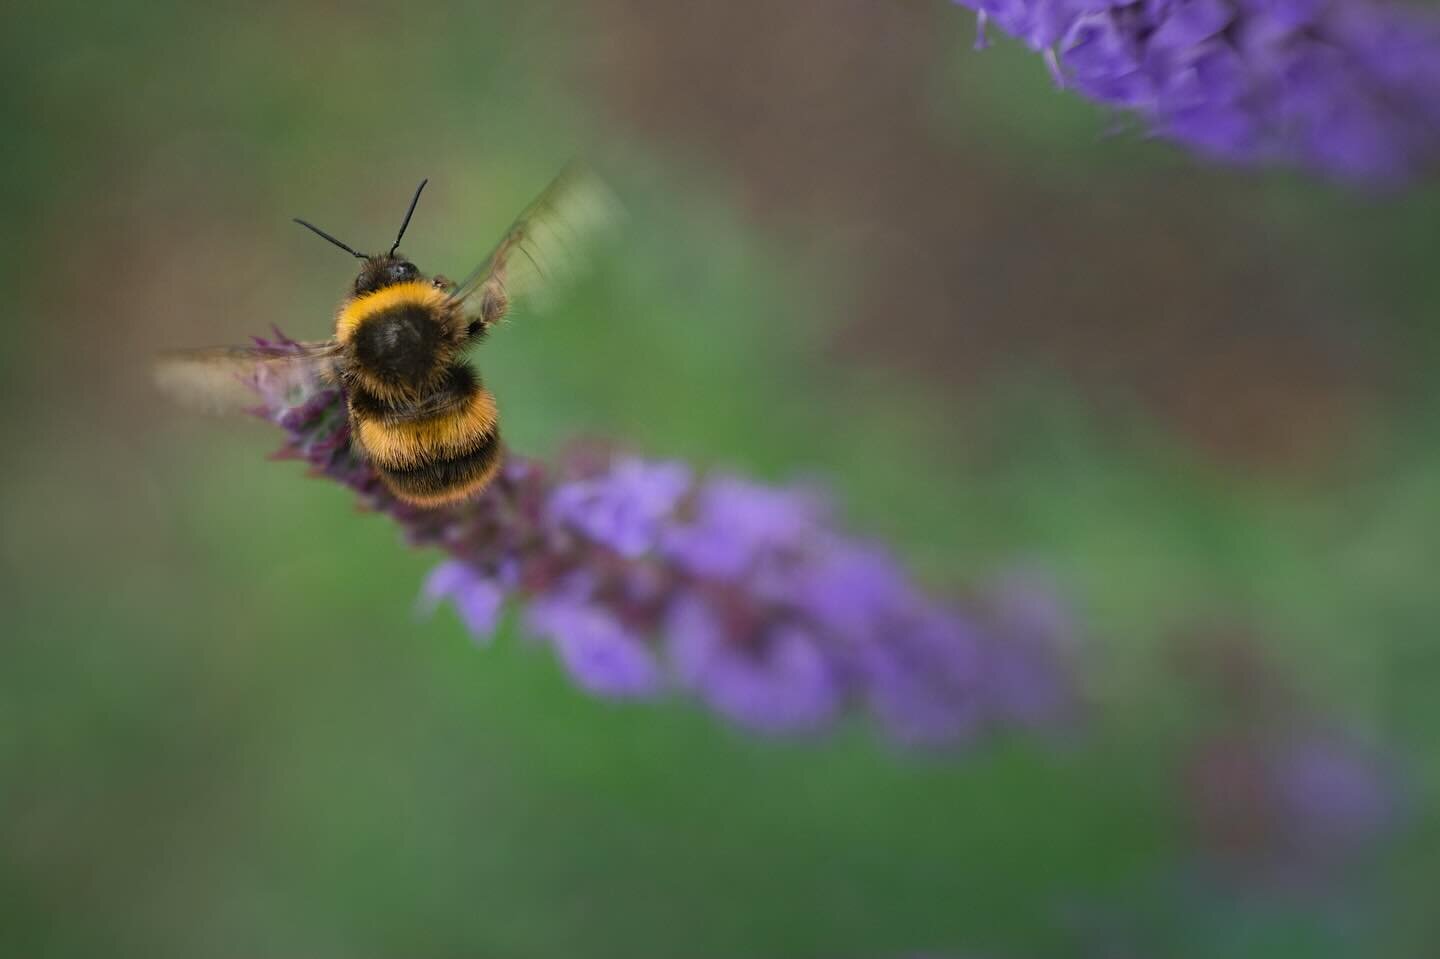 Busy bee 🐝
Captured with the Lensbaby Sol 45 and my extension tubes.

&bull;&bull;&bull;&bull;&bull;&bull;&bull;

🌿Feel free to use my ambassador code WSOFIA for a 10% discount on Lensbaby products. Check link in bio.

Have a Lensbaby question? ple